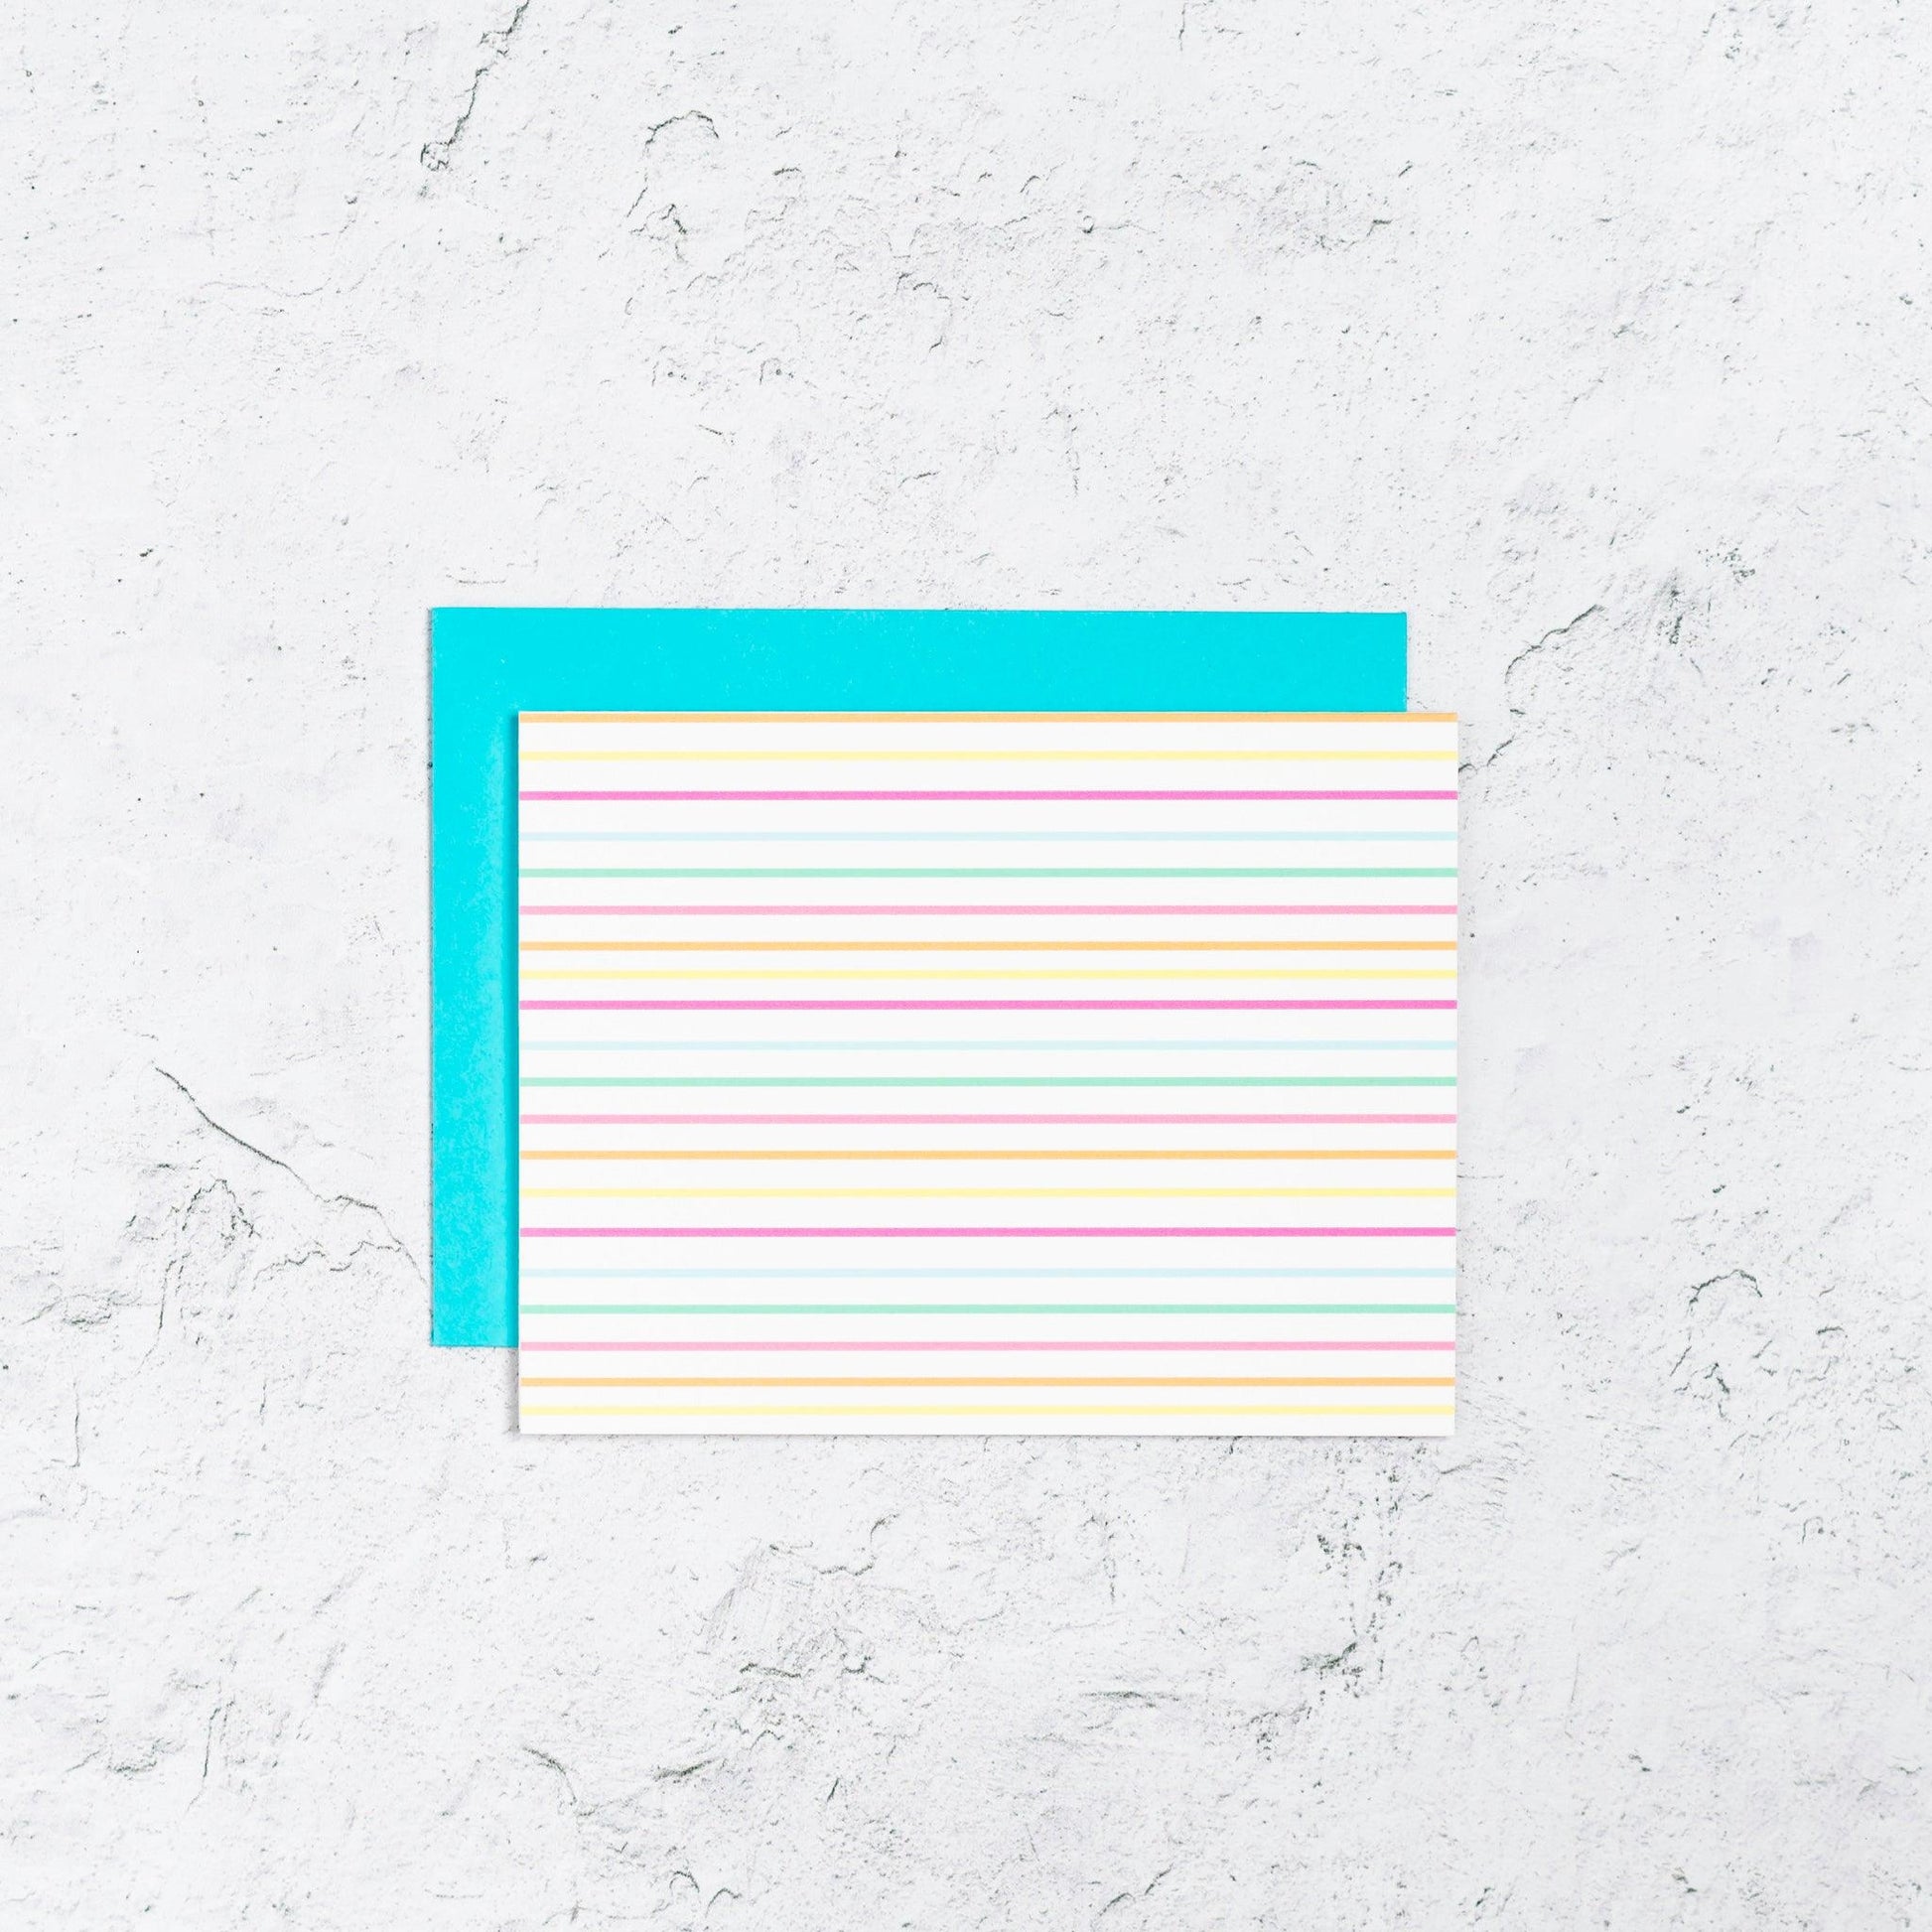 Striped Notecard in bright colors.